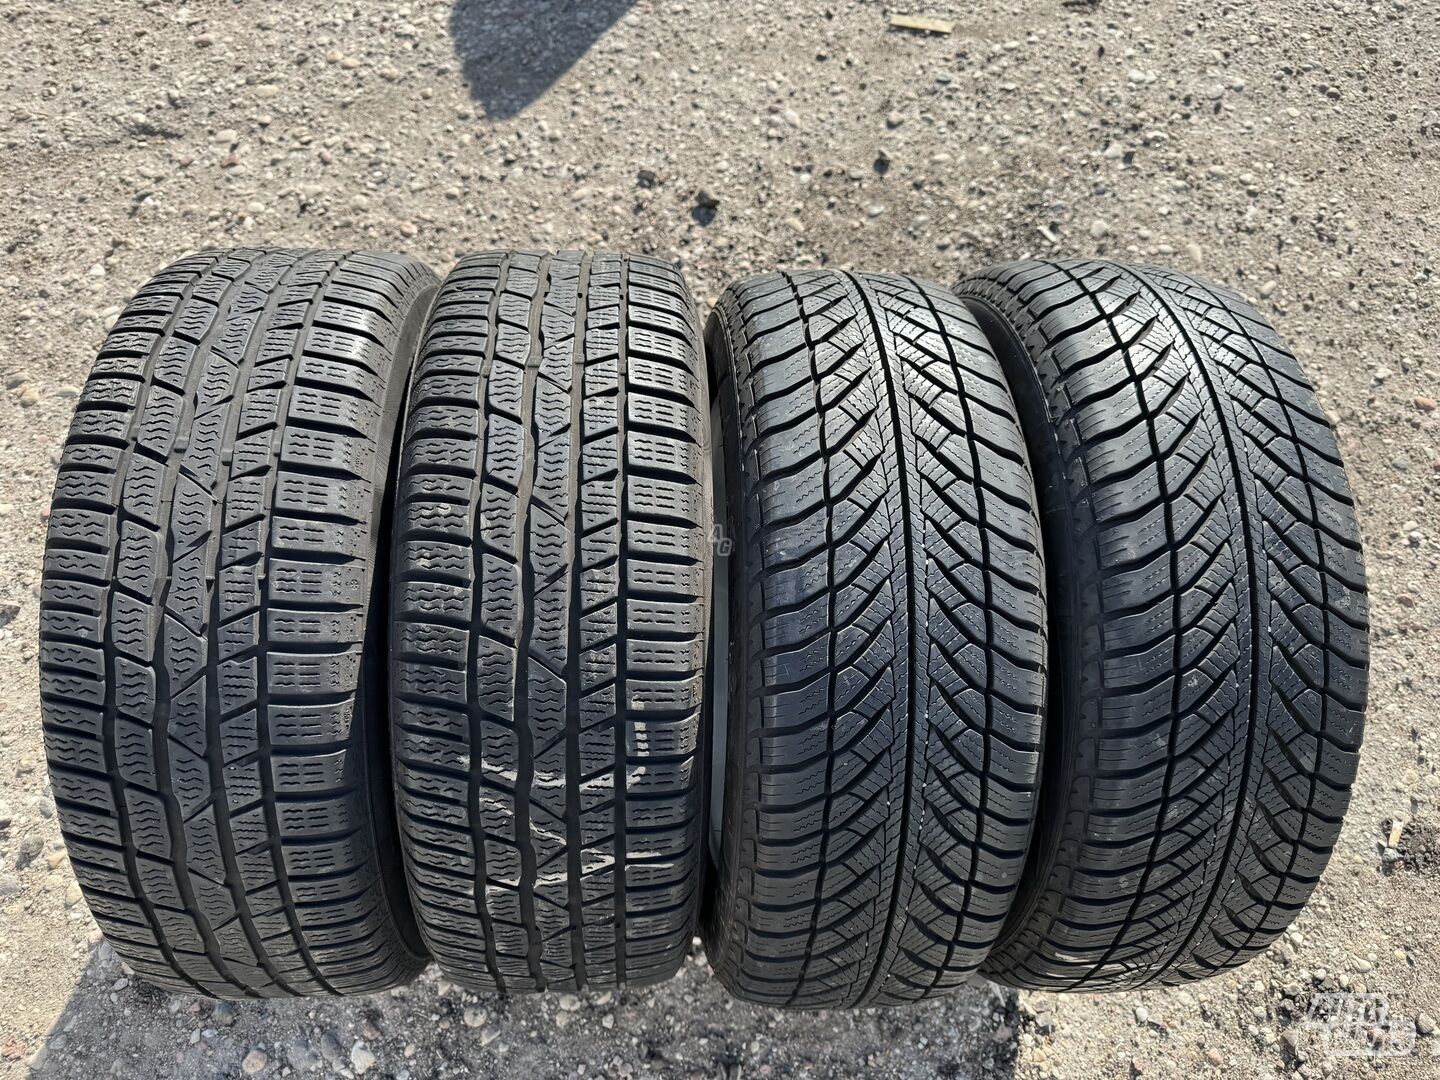 Goodyear Siunciam, 6-8mm 2019 R16 universal tyres passanger car